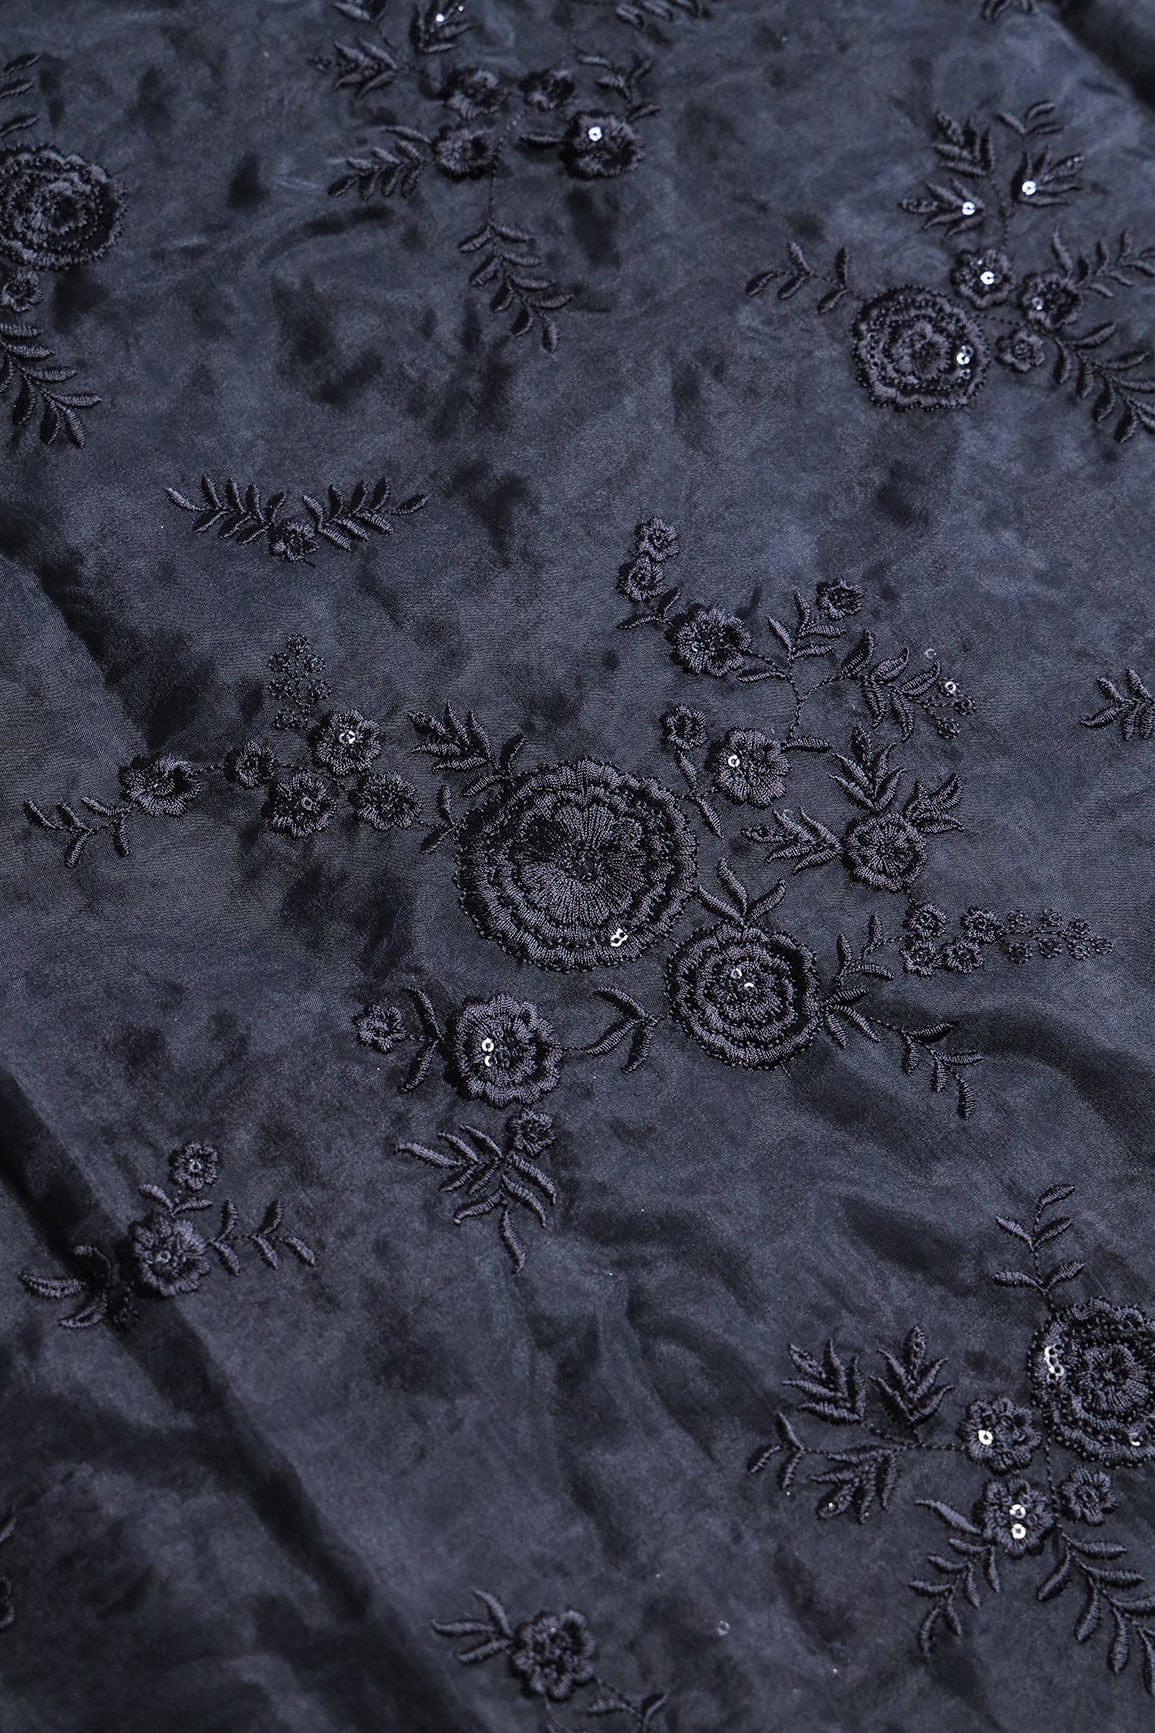 doeraa Embroidery Fabrics Black Thread With Water Sequins Floral Embroidery Work On Black Organza Fabric